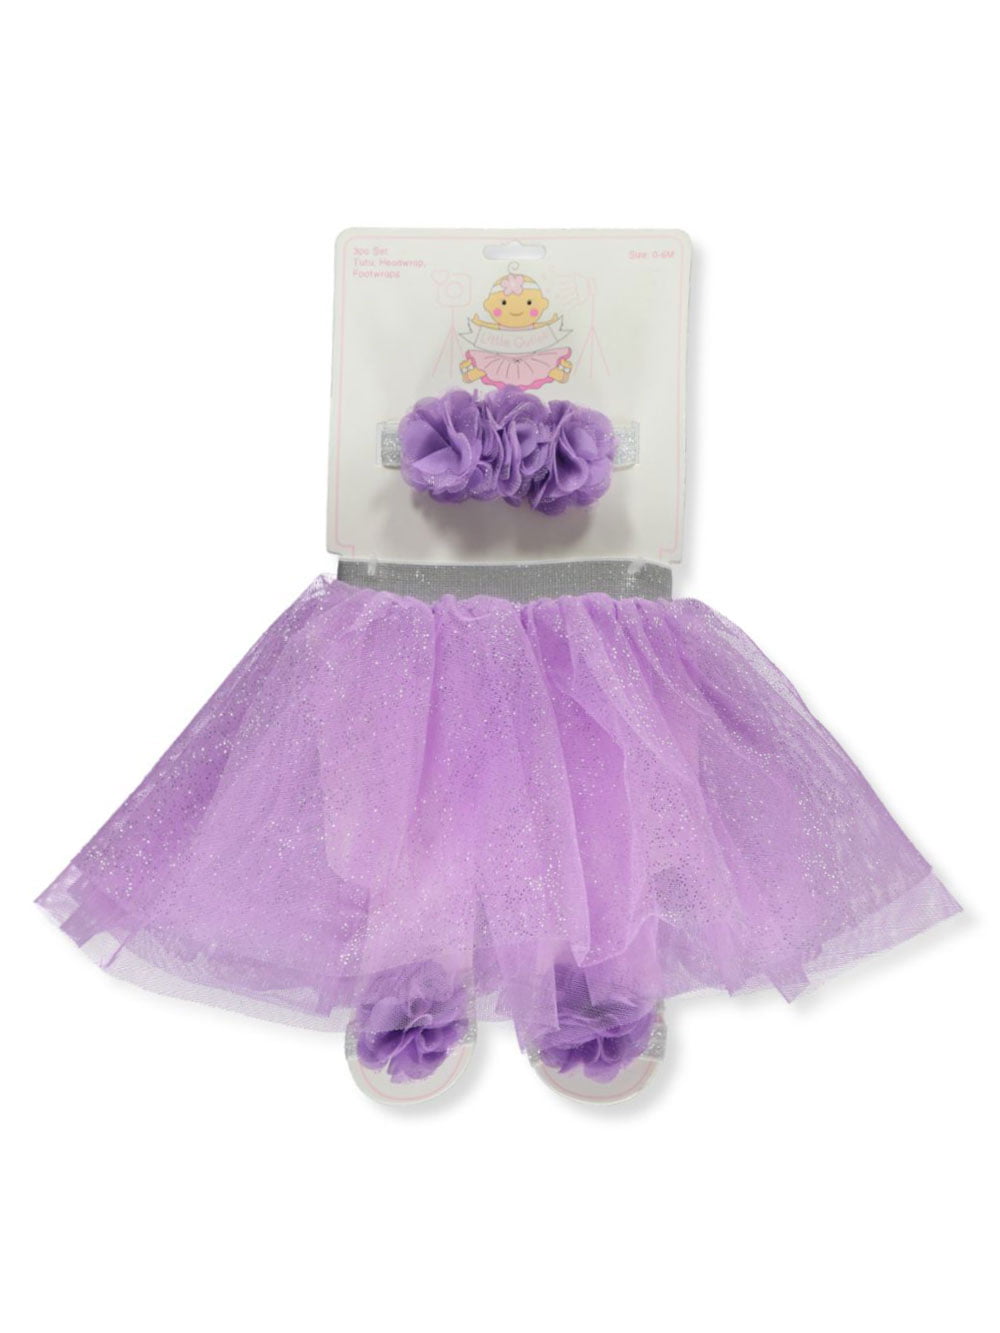 Details about   LITTLE CUTIES BABY INFANT GIRL HEADWRAP TUTU & FOOTWRAPS GIFT SET 0-6 MONTHS NEW 